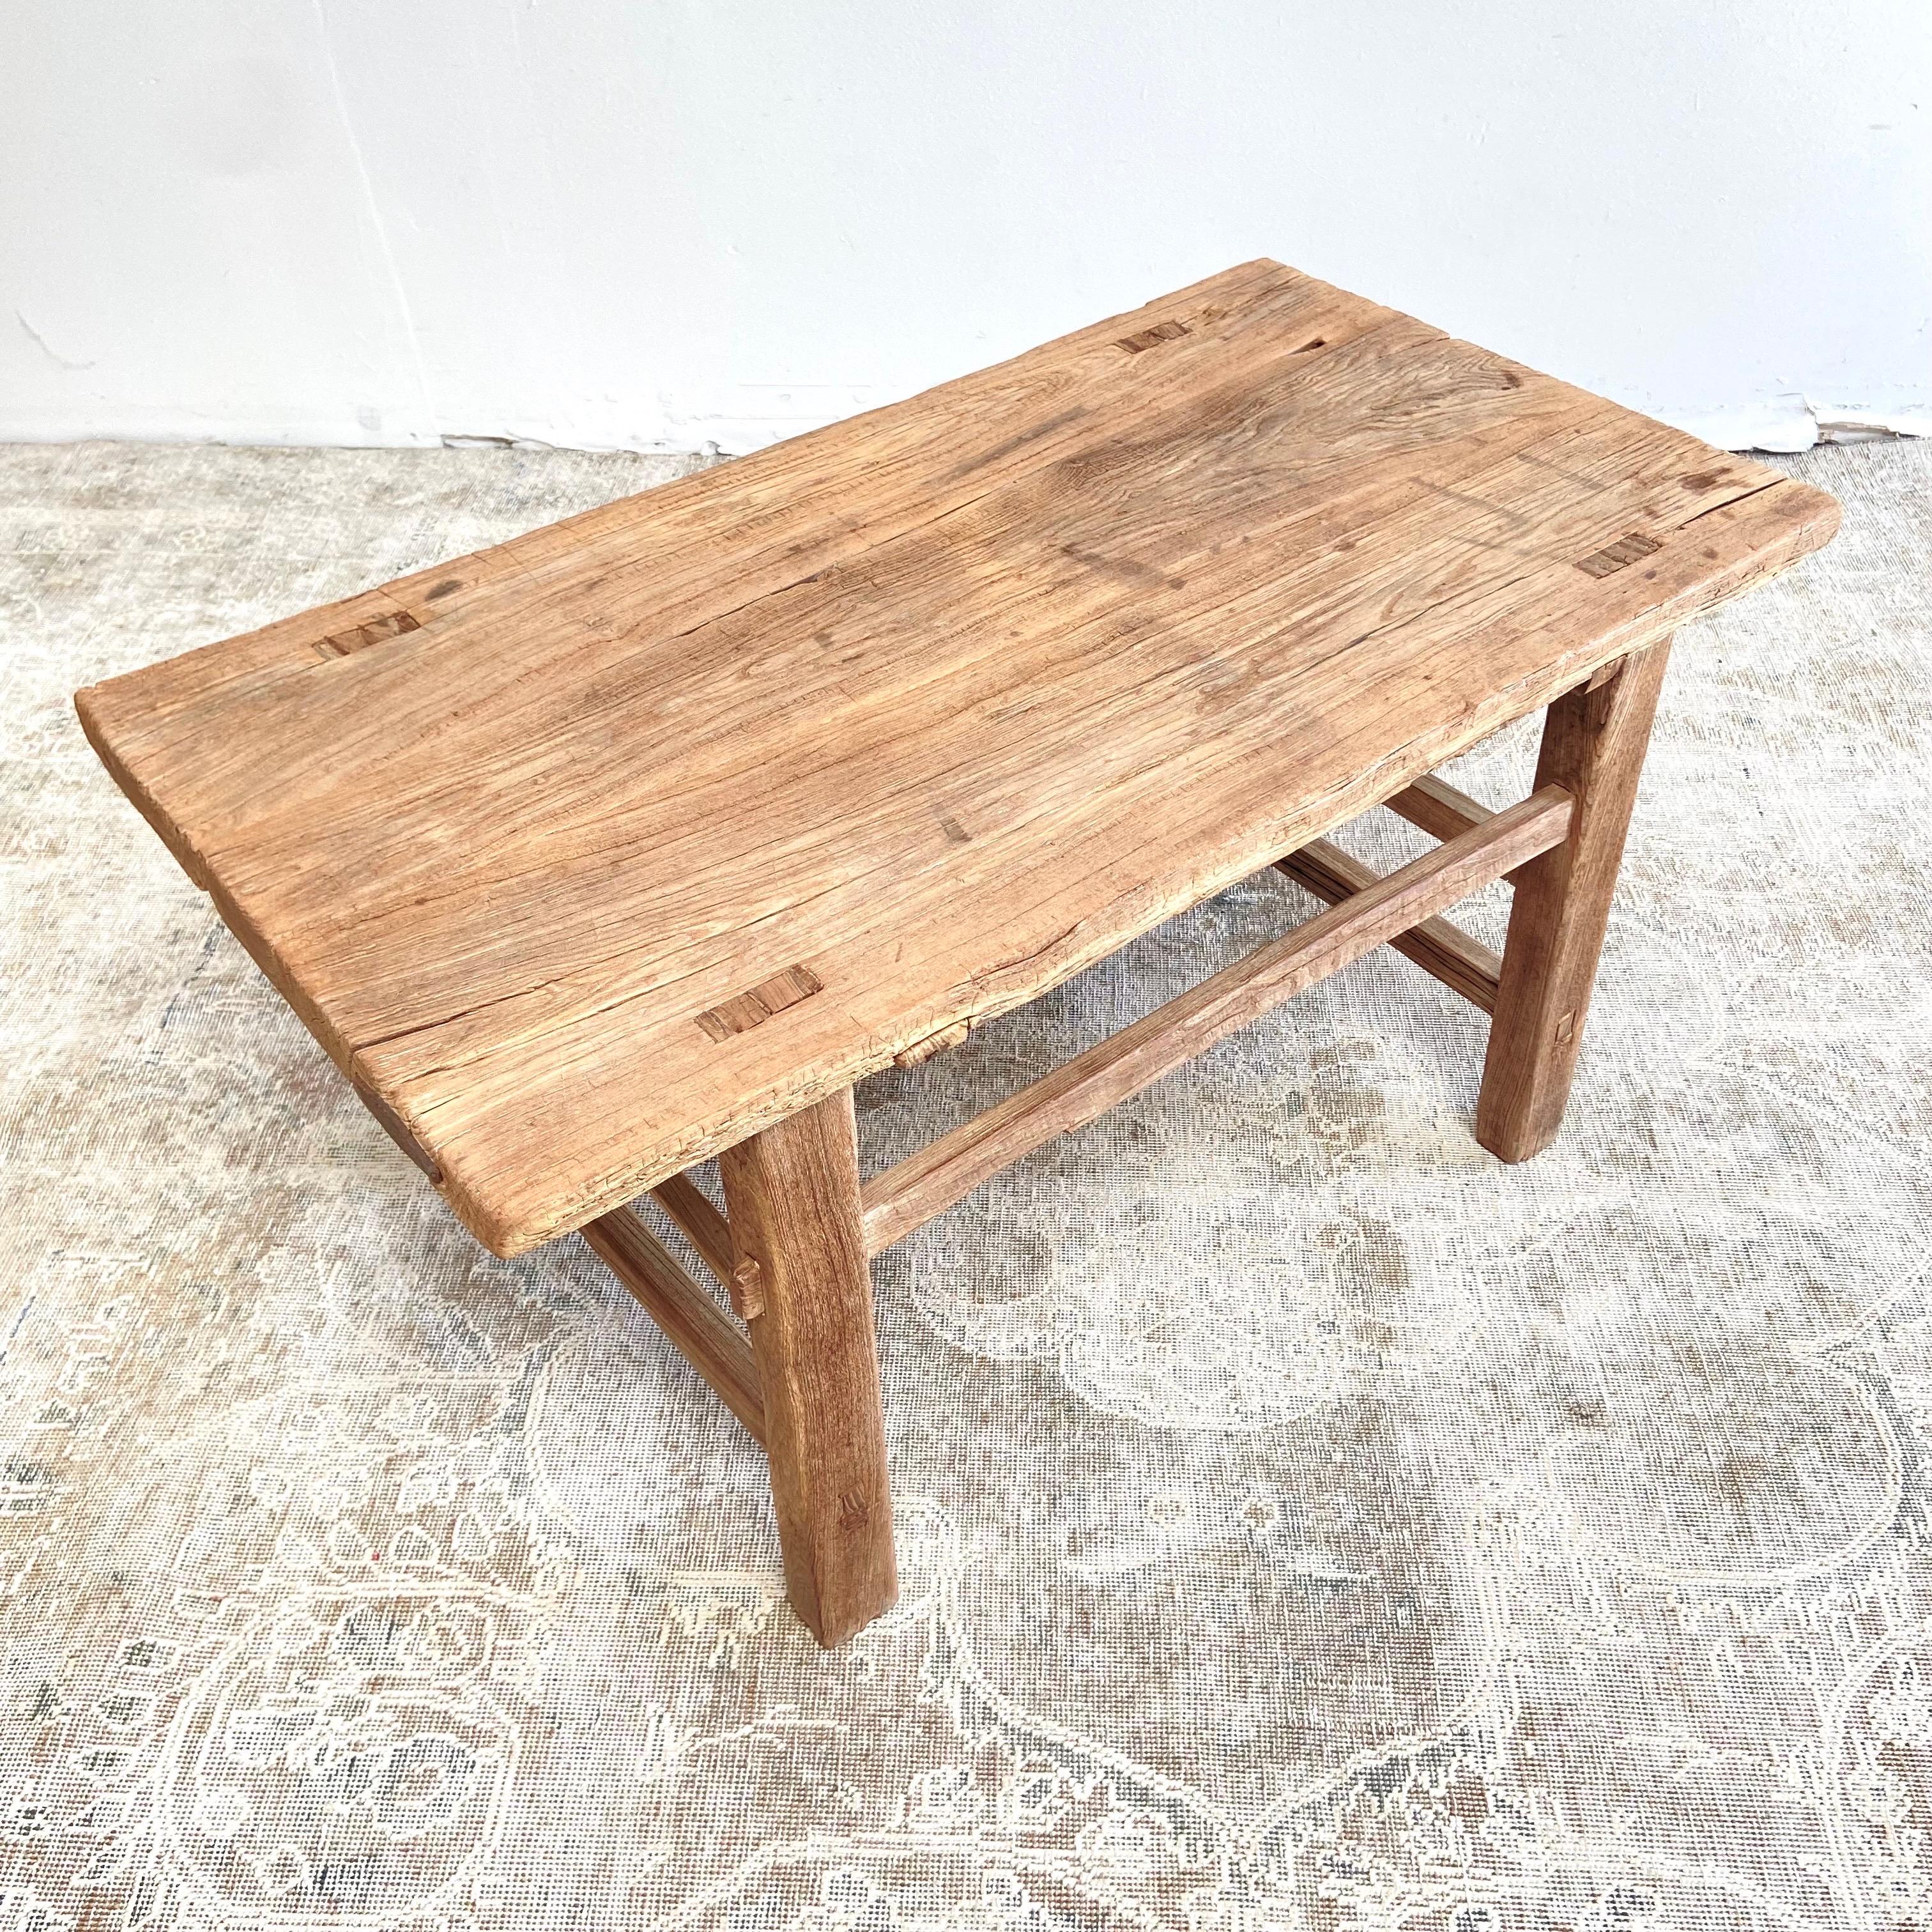 Vintage antique elmwood coffee table with beautiful antique weathered patina top beautiful antique patina, with weathering and age, these are solid and sturdy ready for daily use, use as a coffee table or entry bench. Each piece is truly unique and